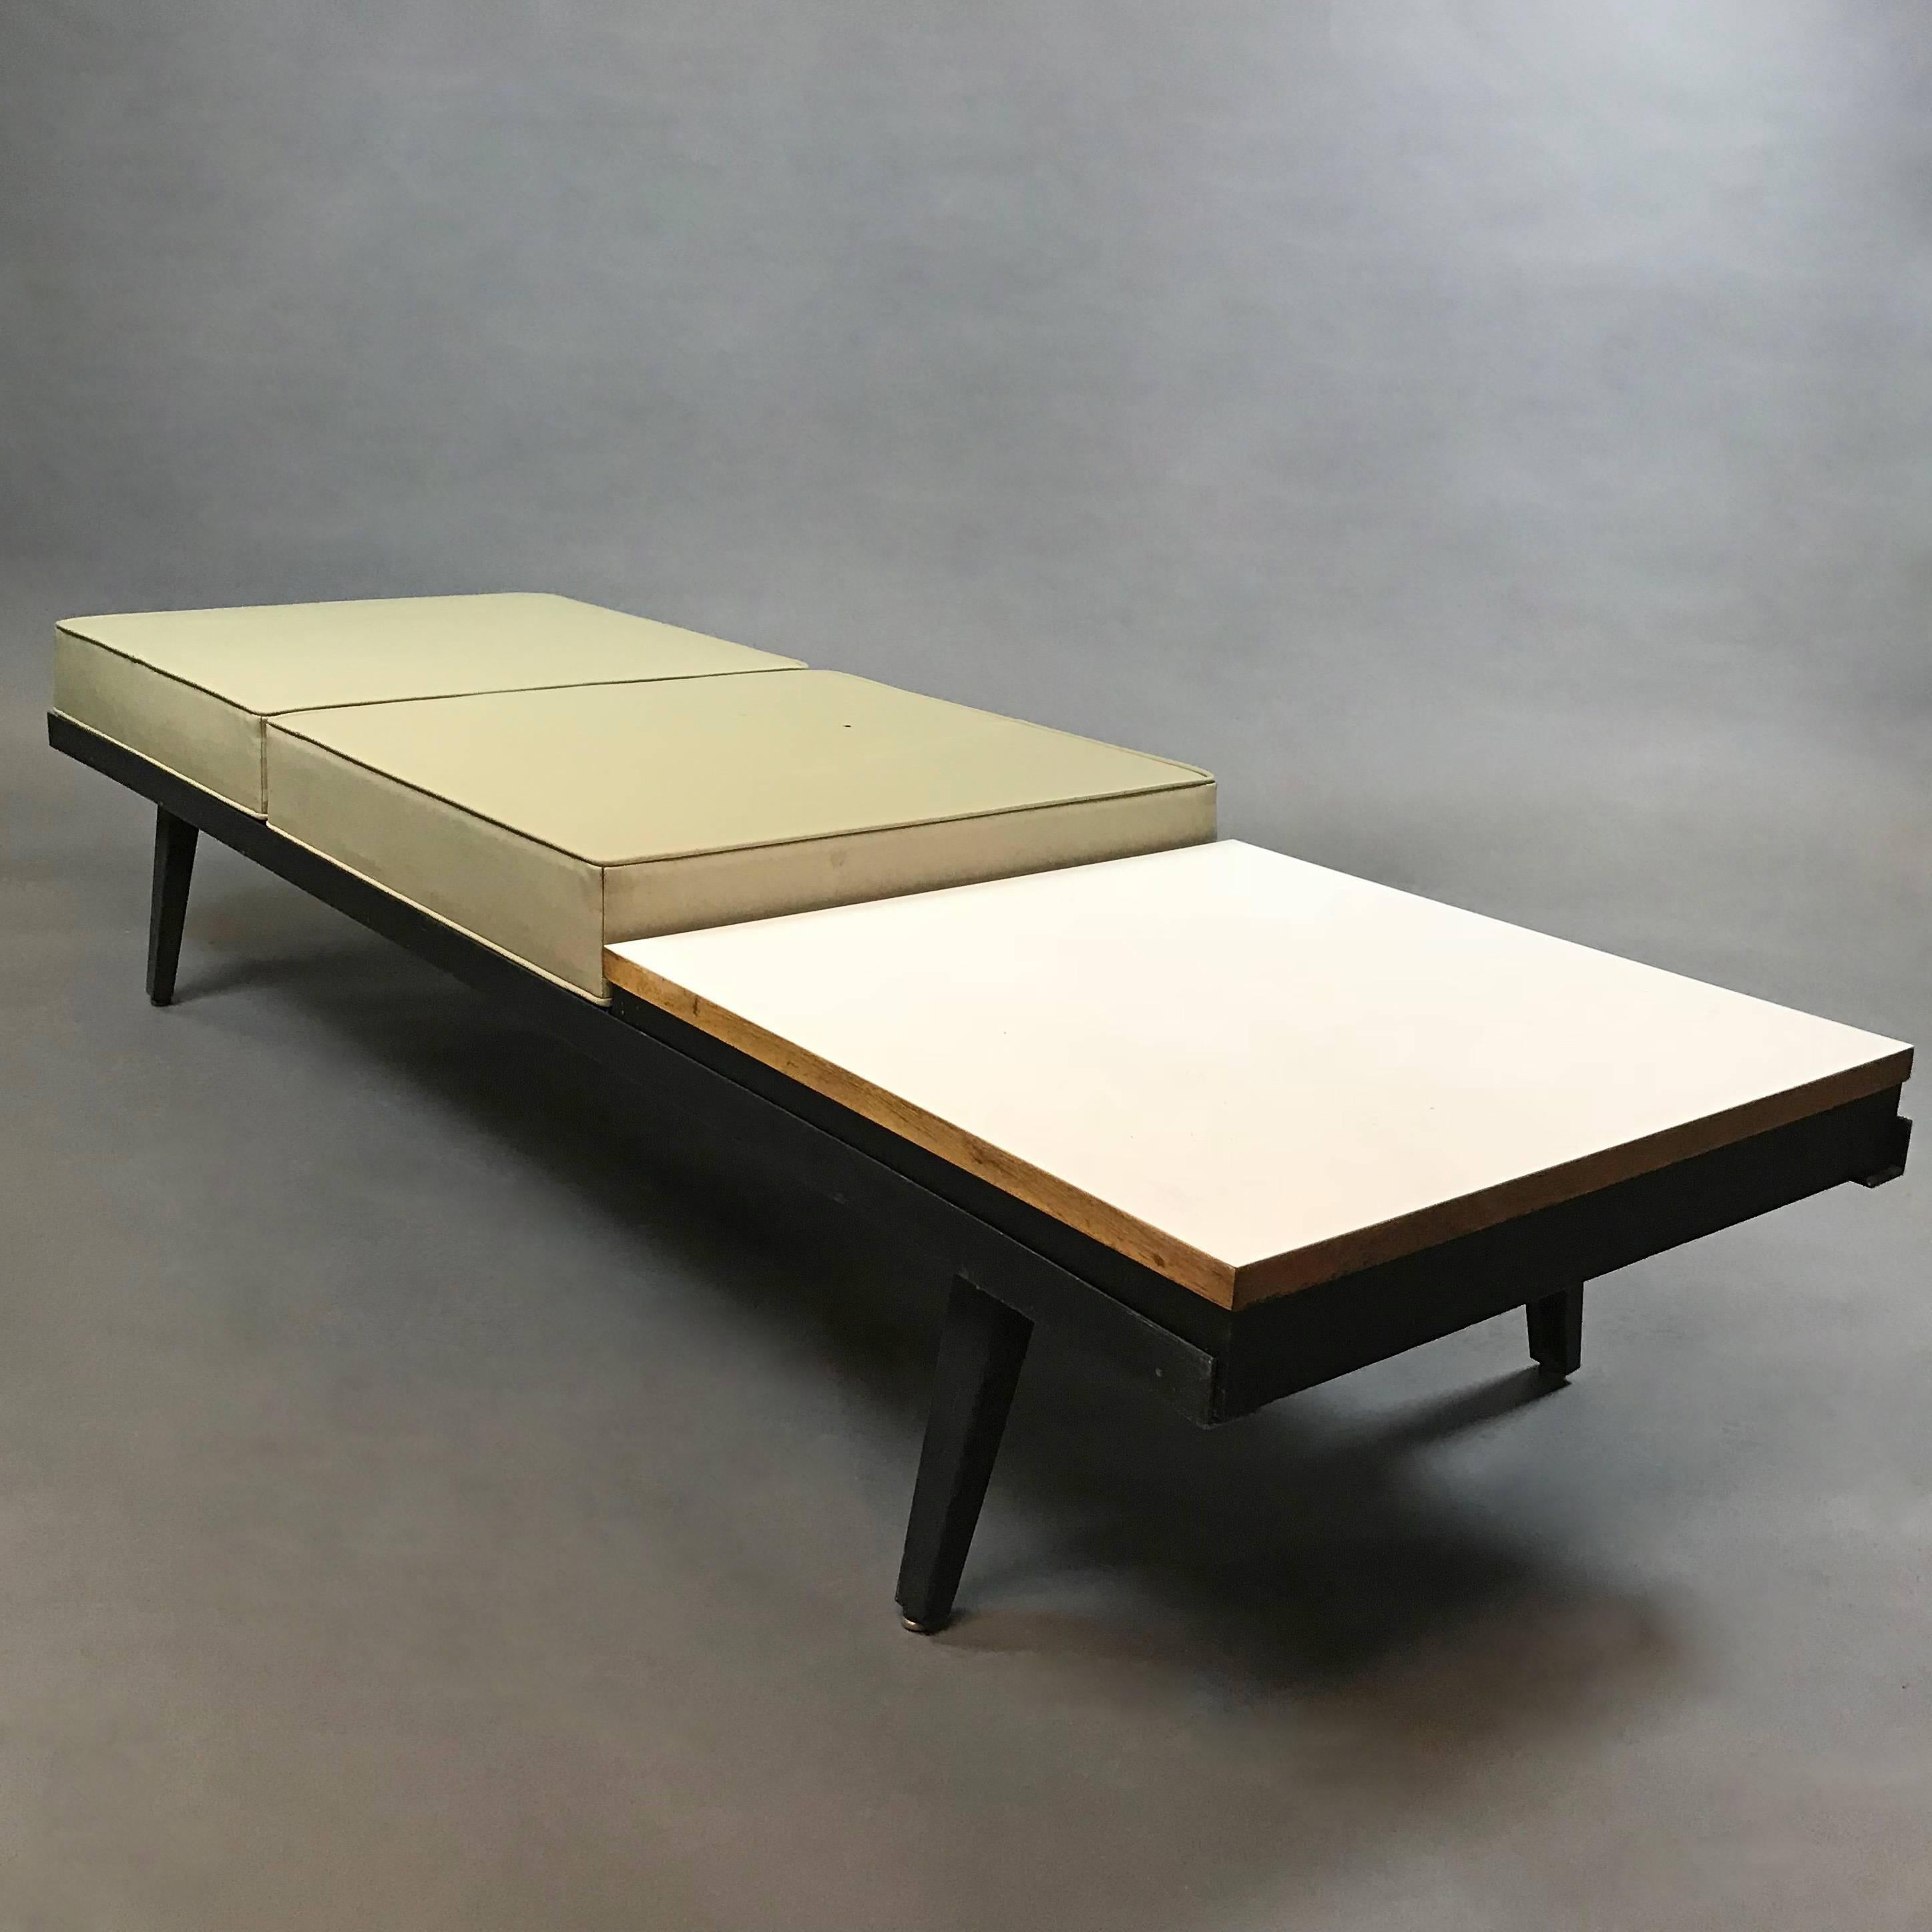 American Early Modular Steel Frame Bench by George Nelson for Herman Miller